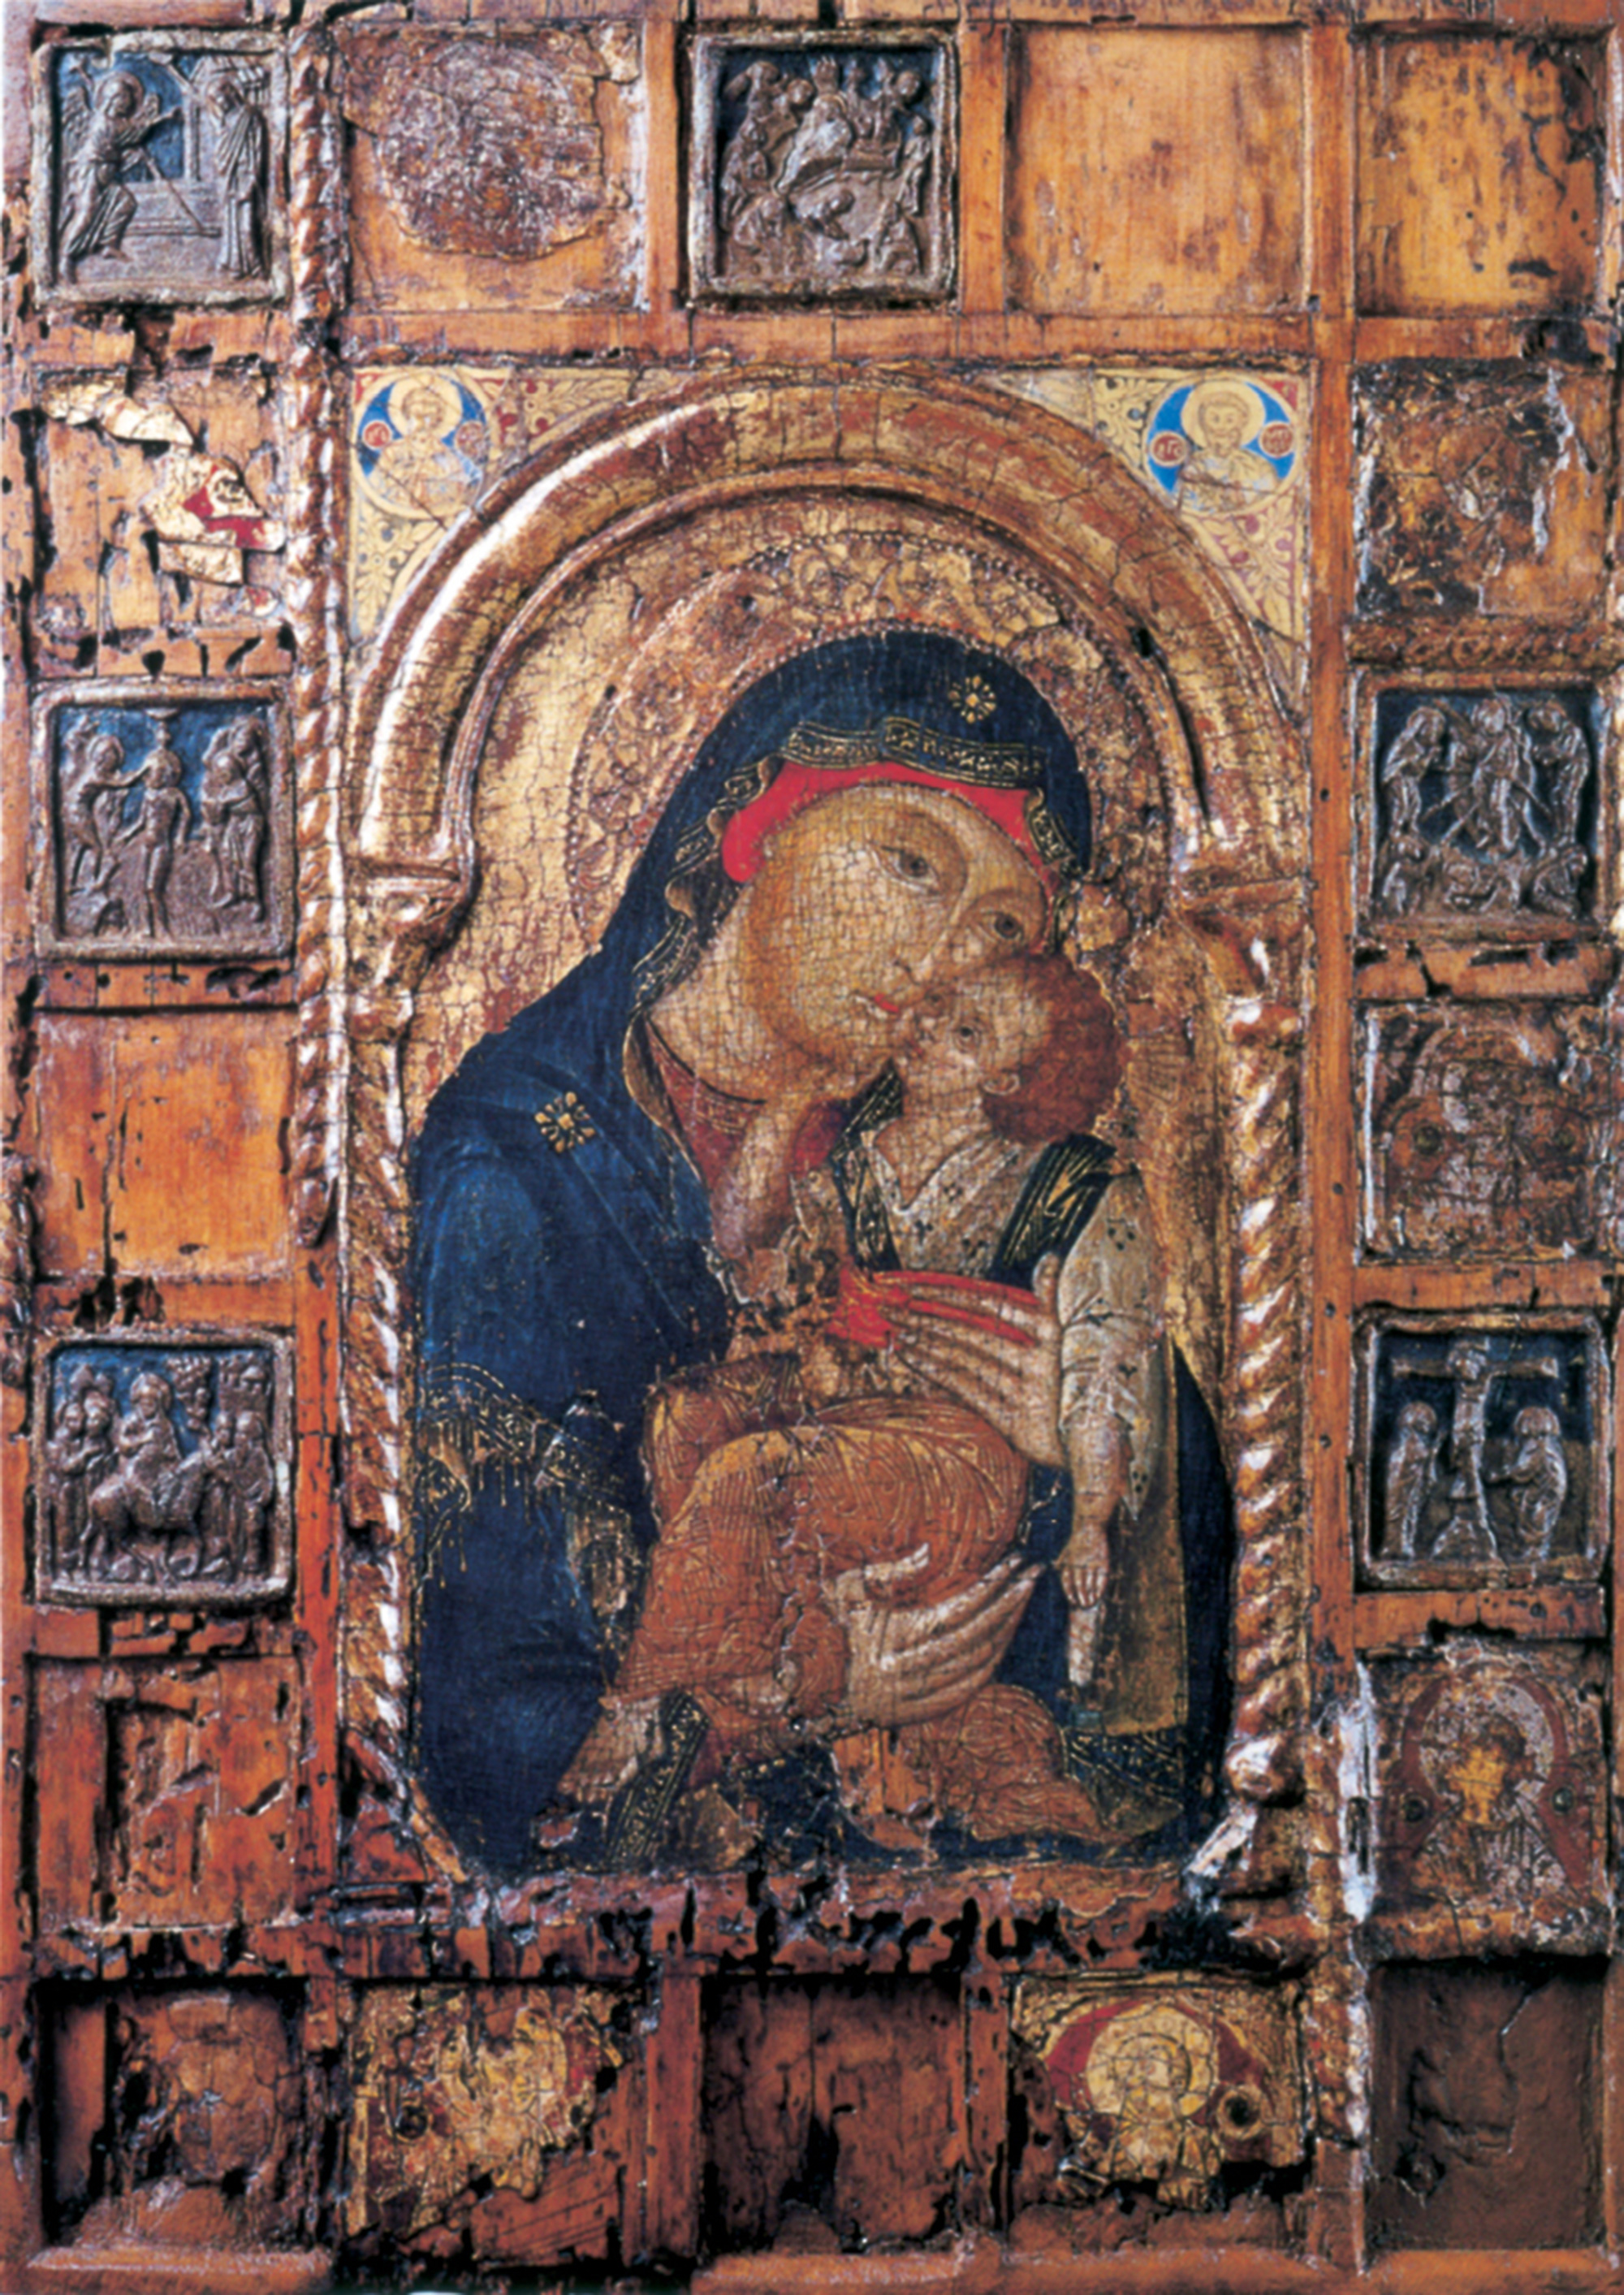 A photograph of a painted wooden icon of the Virgin Eleousa from the mid-fourteenth century.